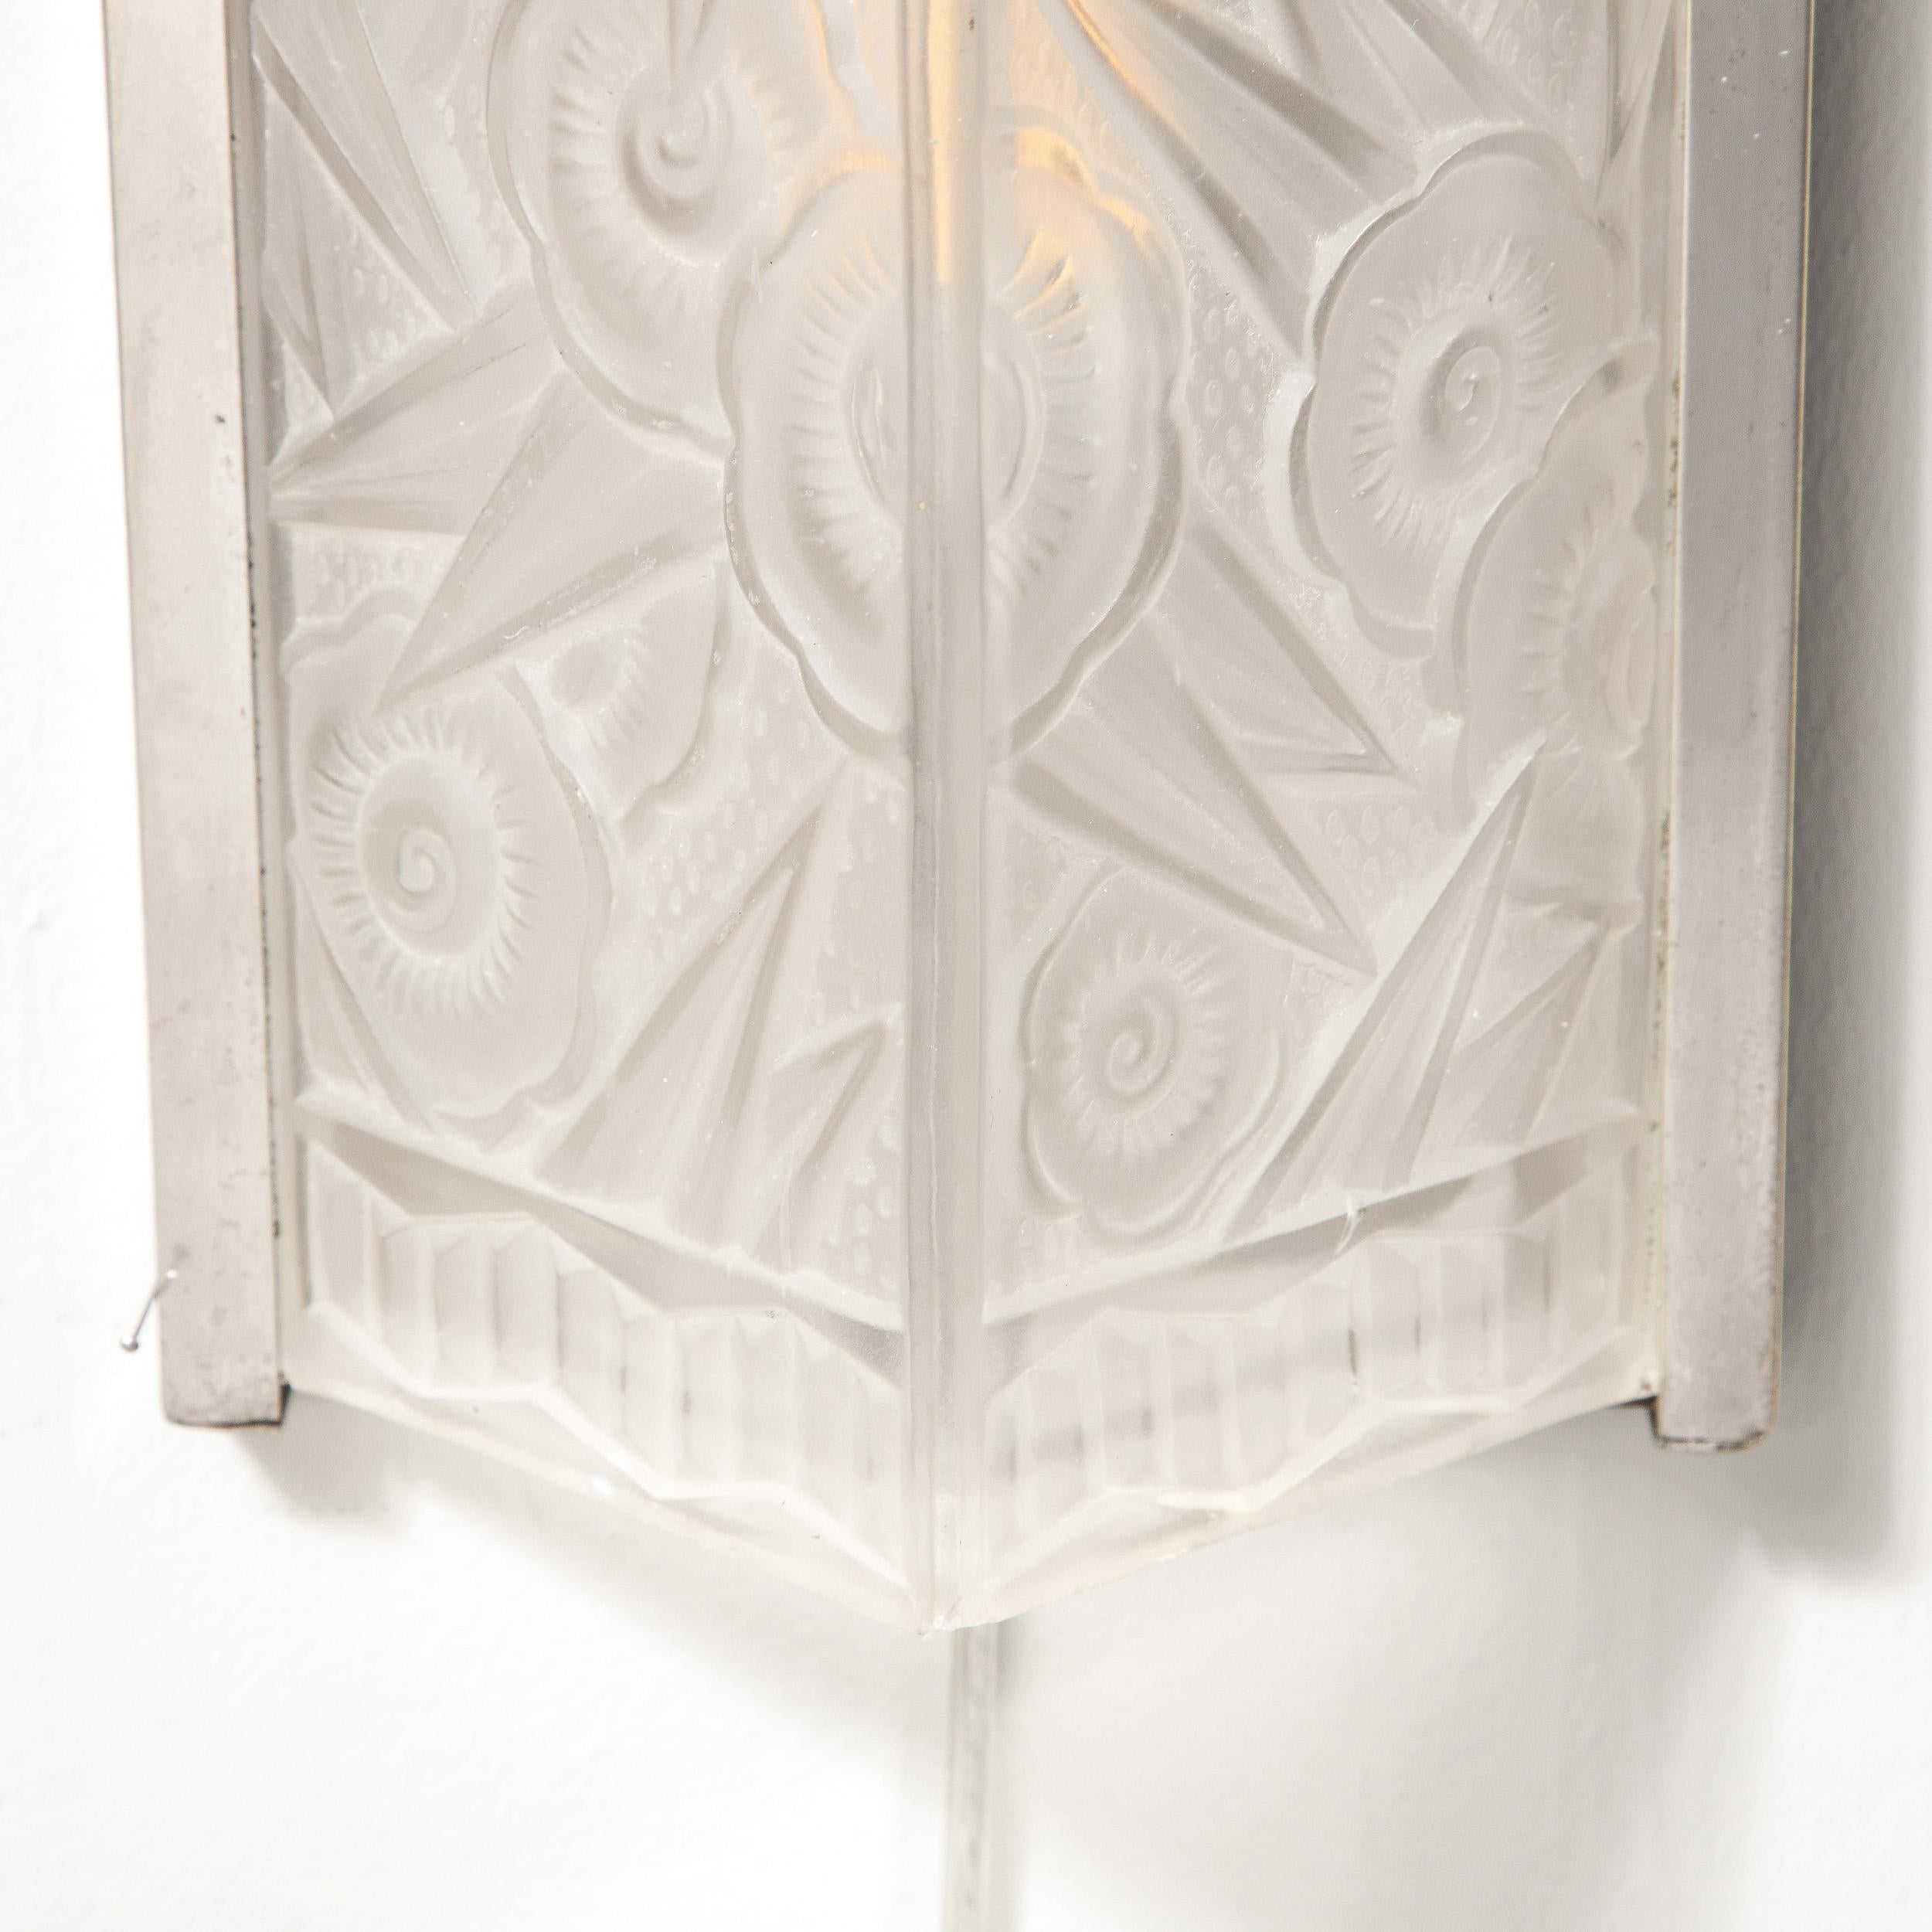 Pair of Art Deco Molded & Frosted Glass Sconces w/ Stylized Cubist Floral Motifs 9